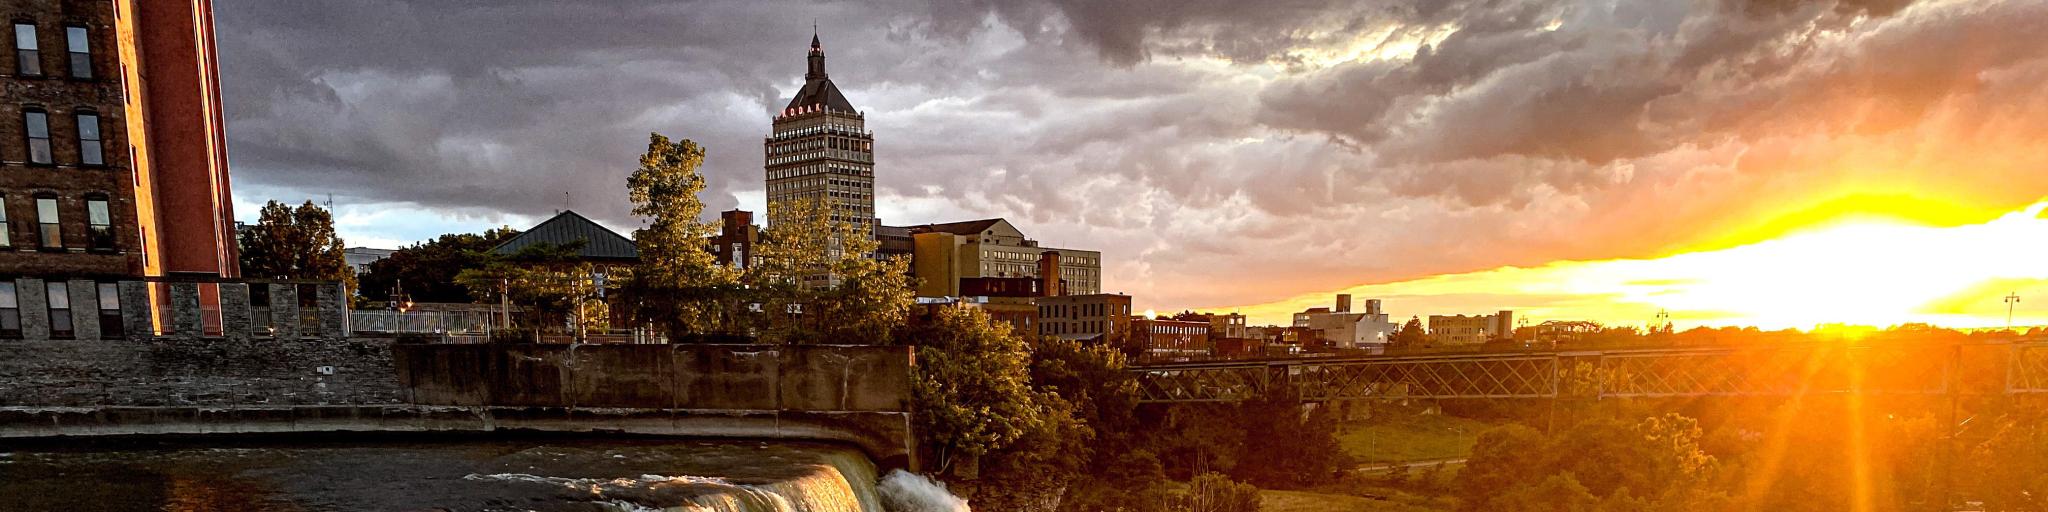 Rochester skyline during sunset with the famous waterfalls in the foreground